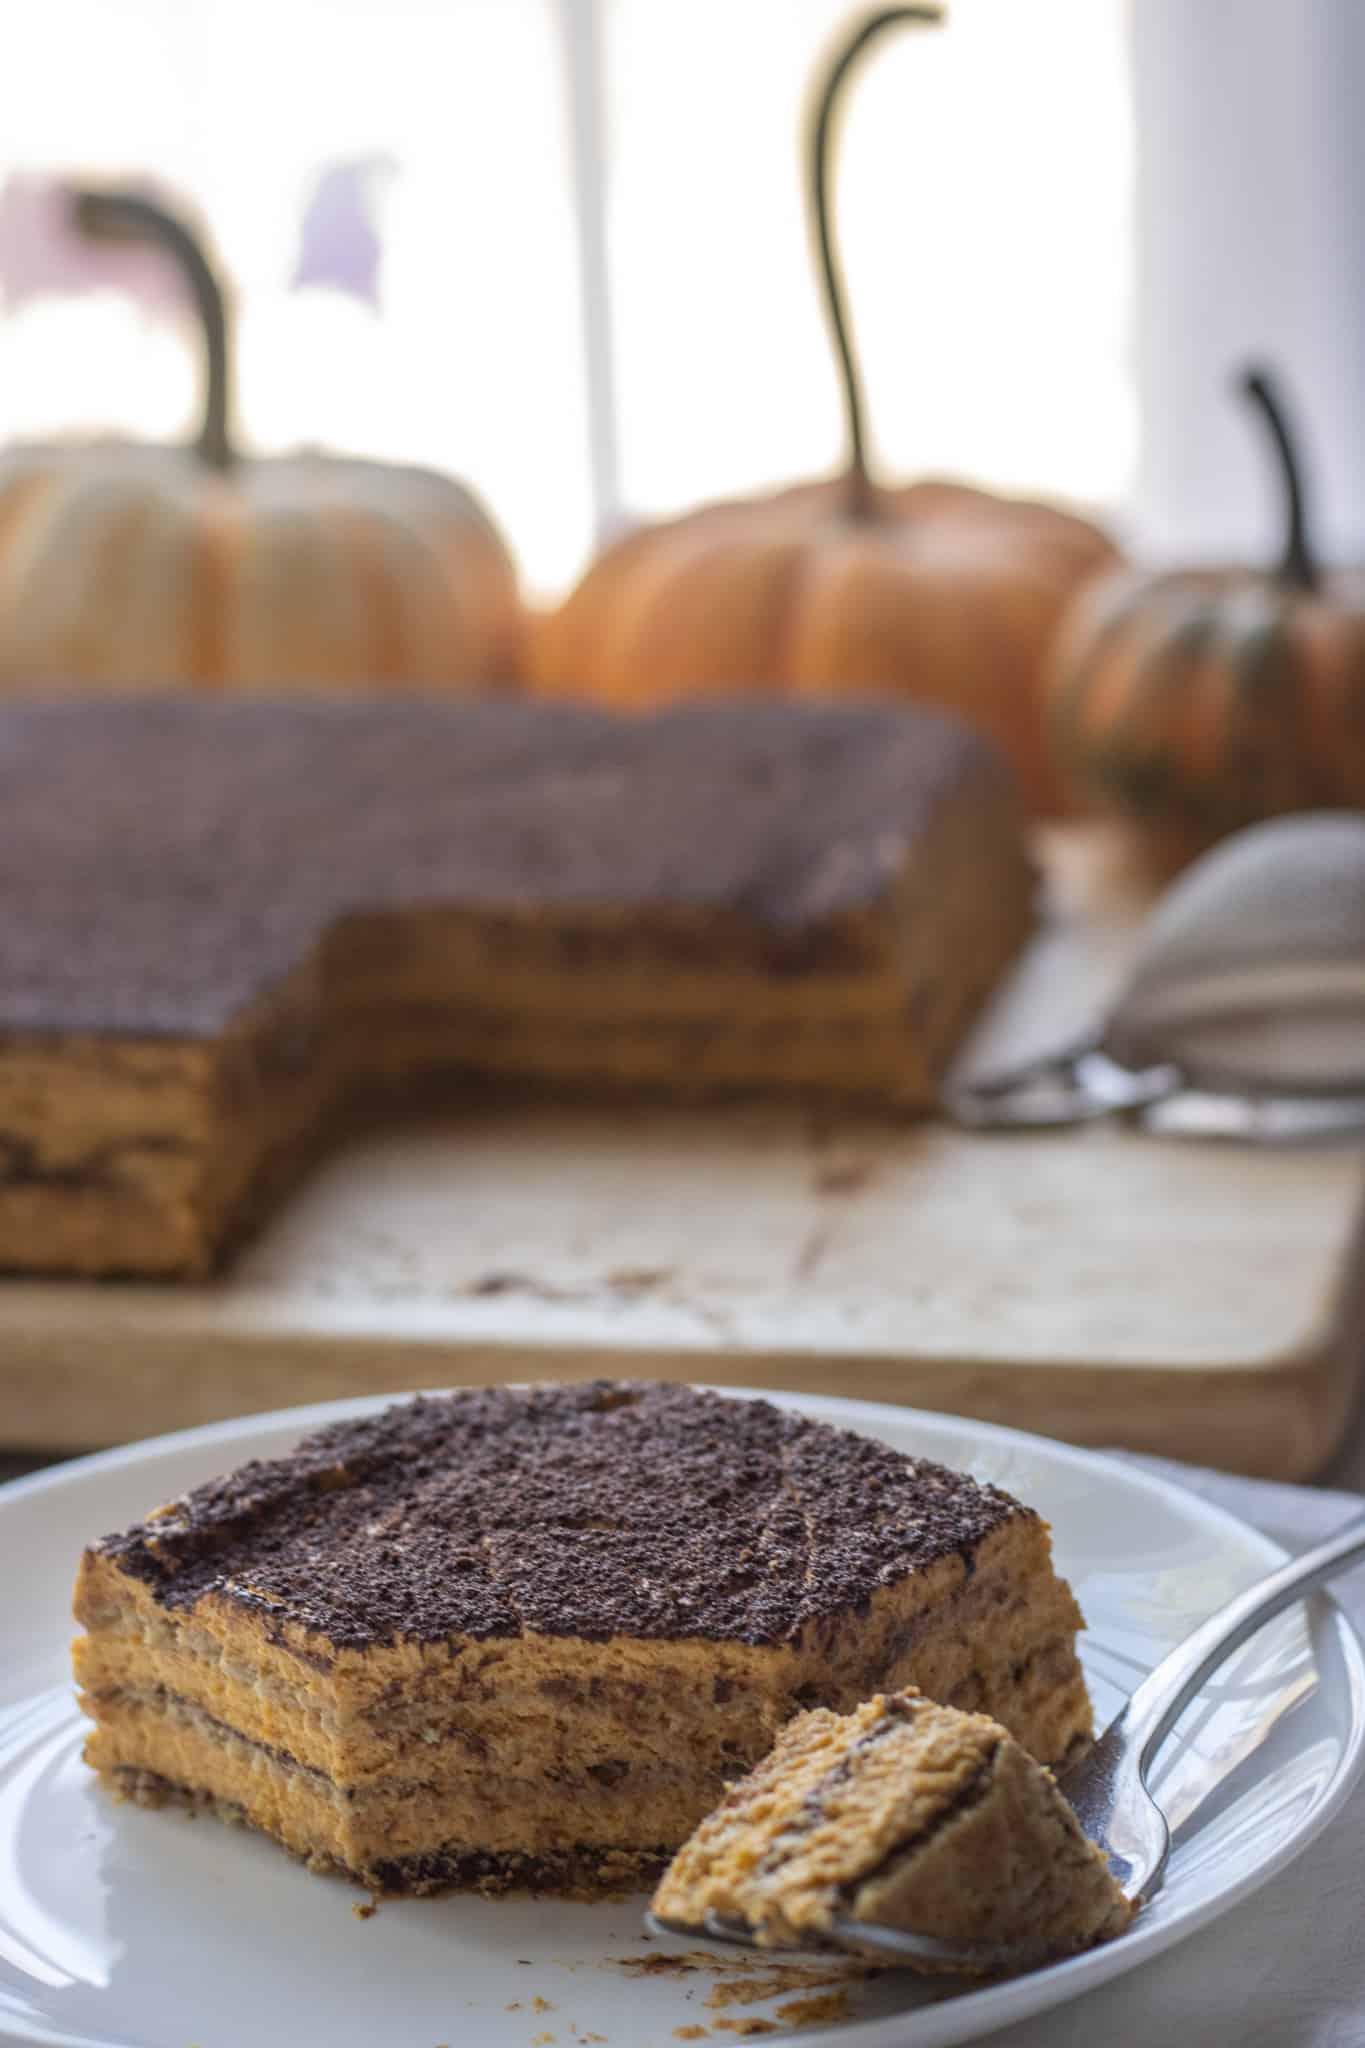 Upclose shot of a slice of pumpkin icebox cake with the cake in the background.